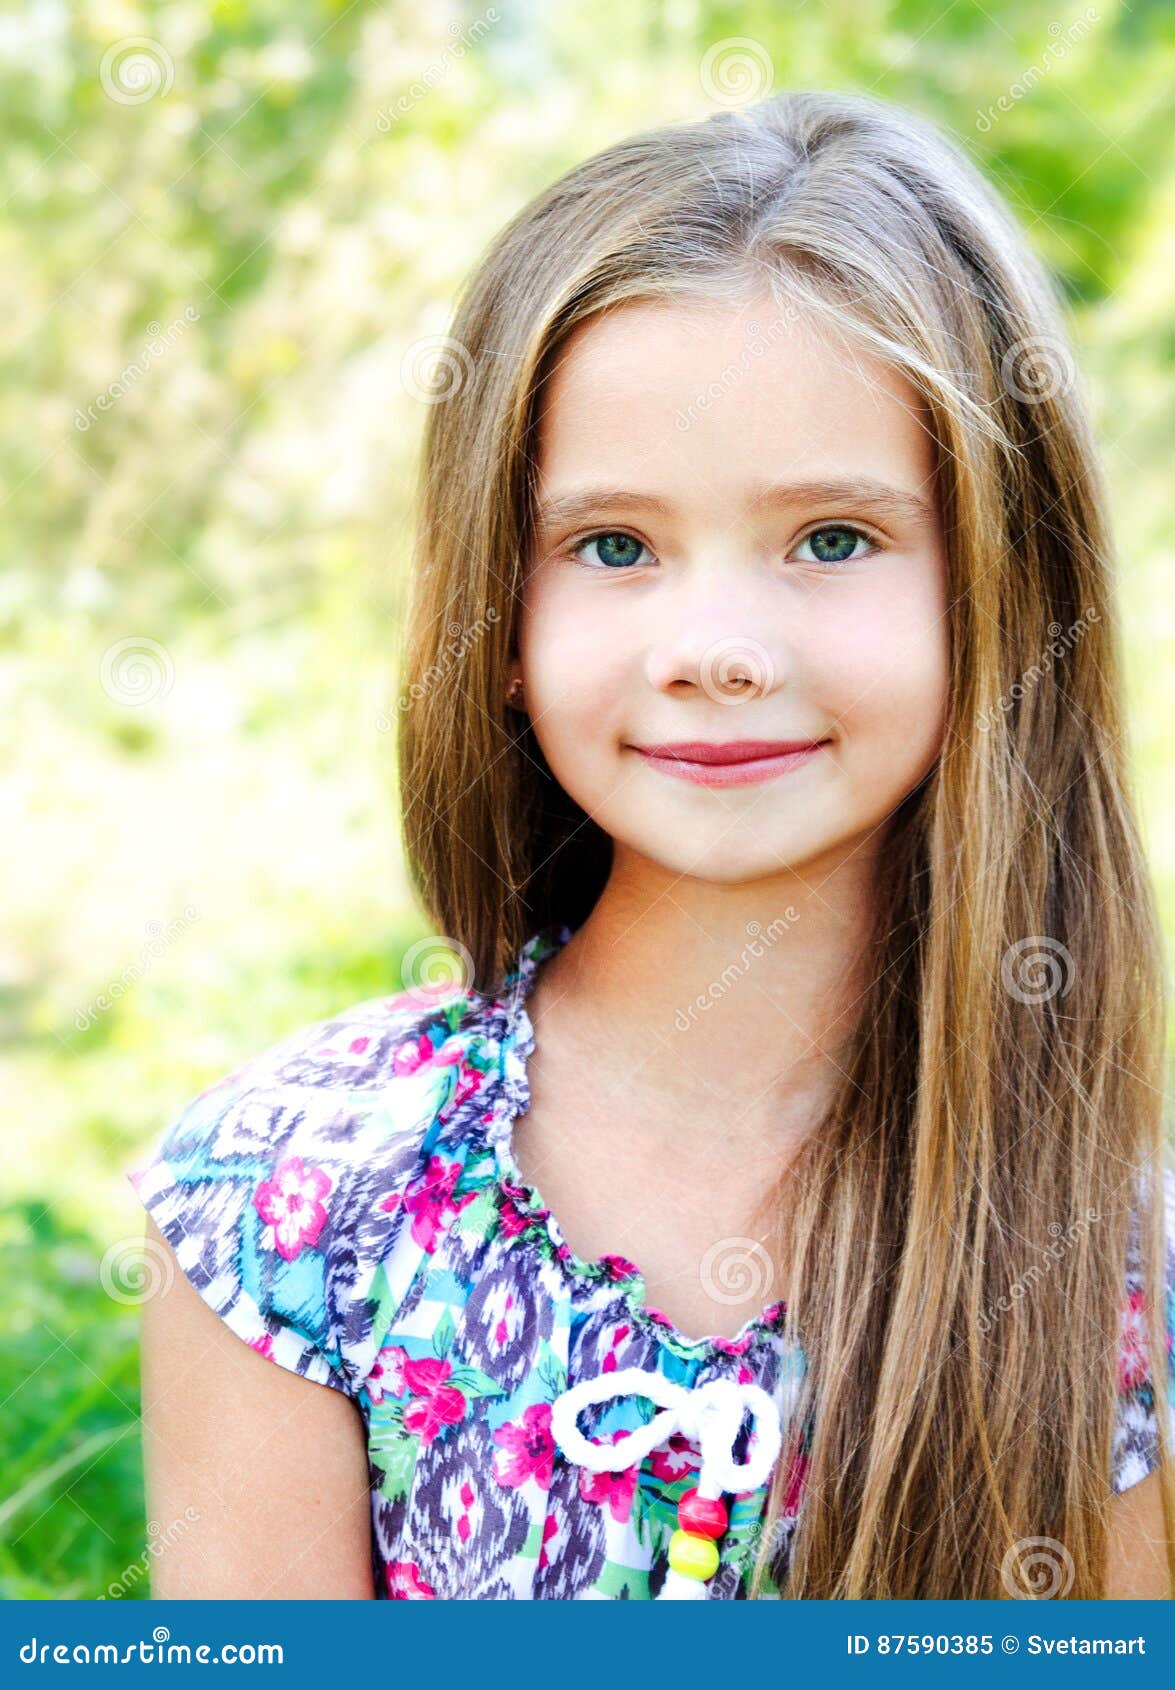 Portrait of Adorable Smiling Little Girl Stock Image - Image of summer ...